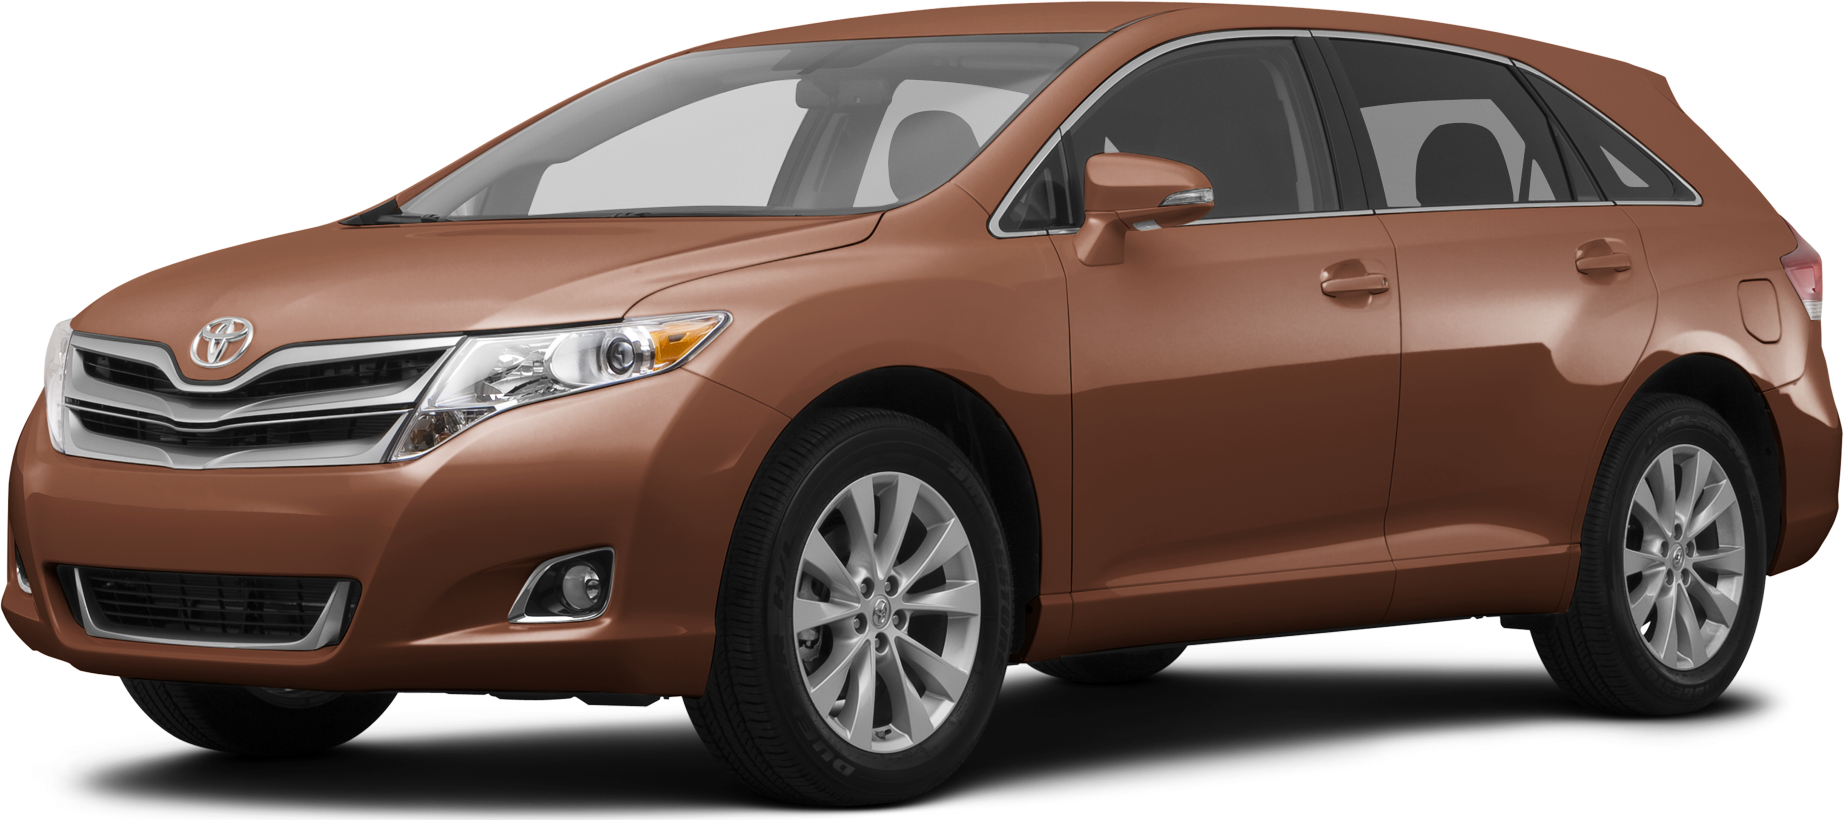 2014 Toyota Venza Price Value Ratings amp Reviews  Kelley Blue Book